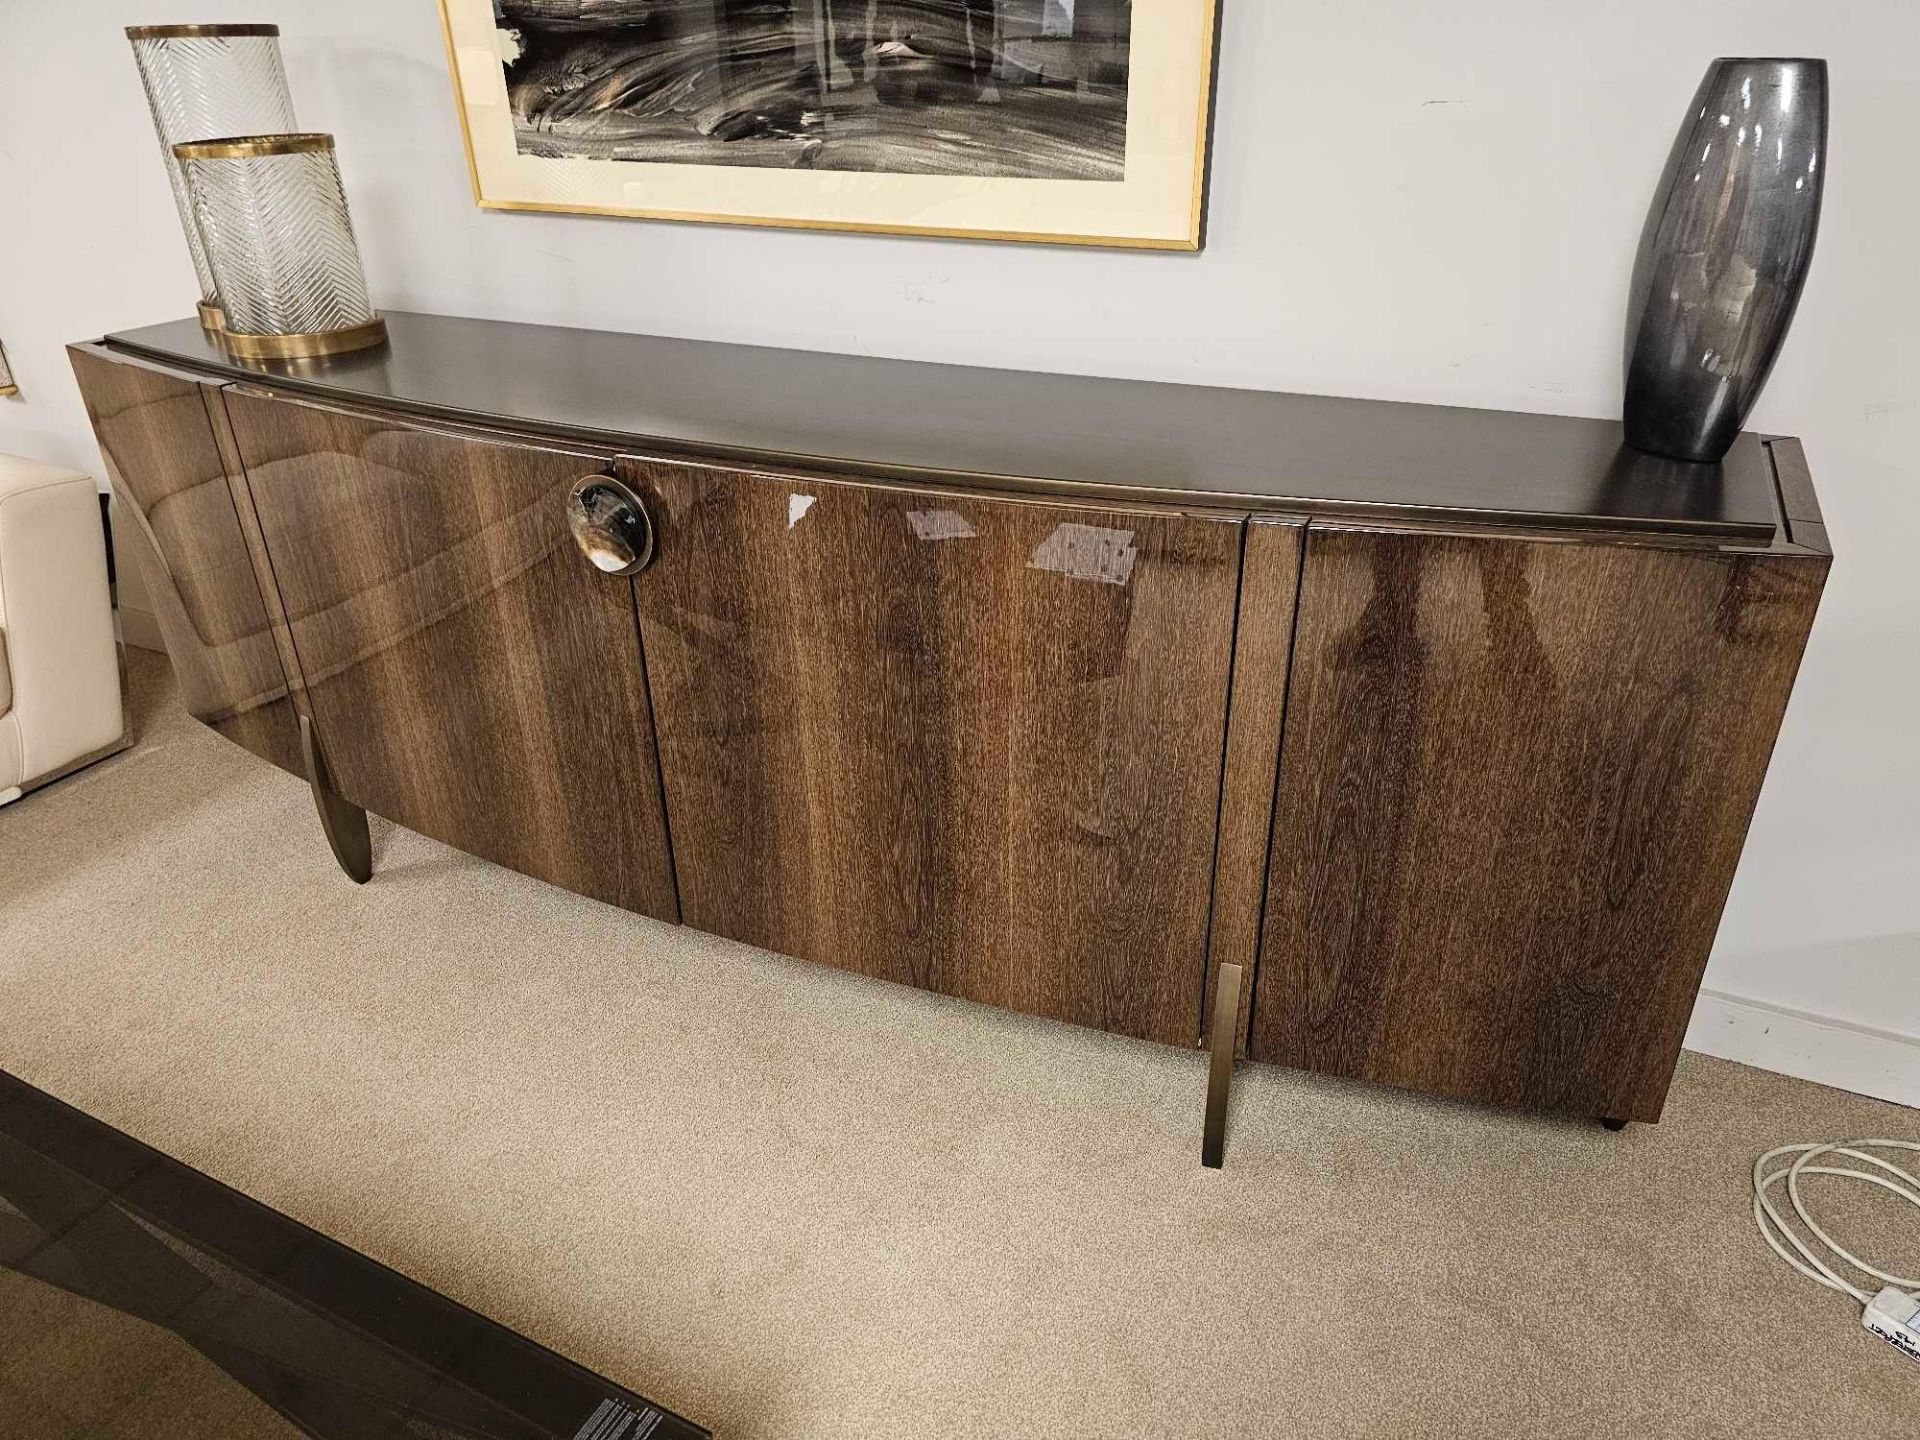 Fashion Affair Large Sideboard by Telemaco for Malerba The Buffet, for the living room, is shaped by - Bild 19 aus 25